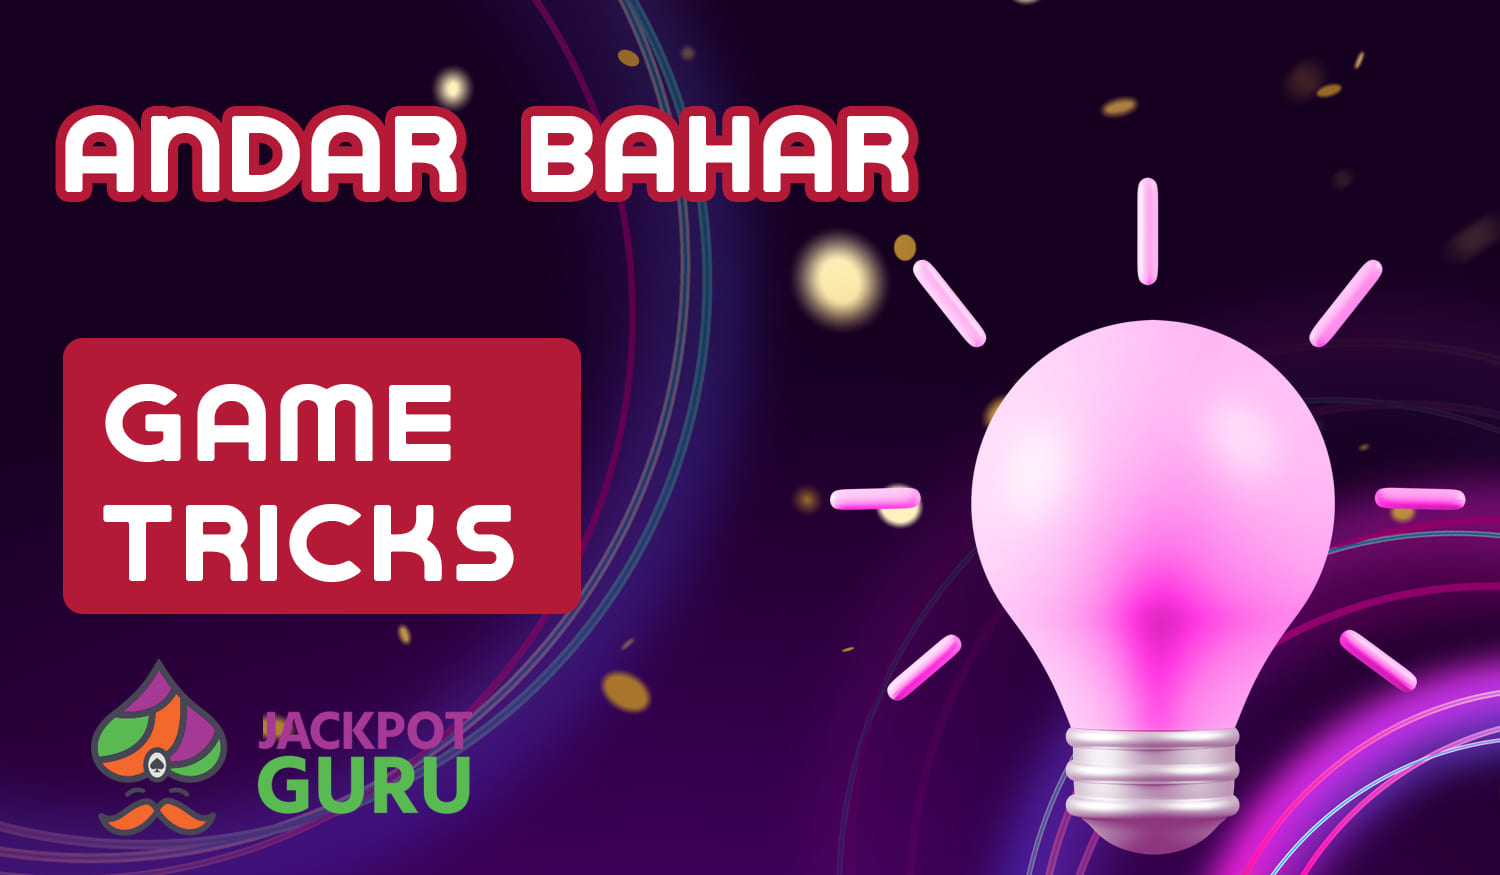 List of useful tips for beginner Andar Bahar players from India at Jackpot Guru